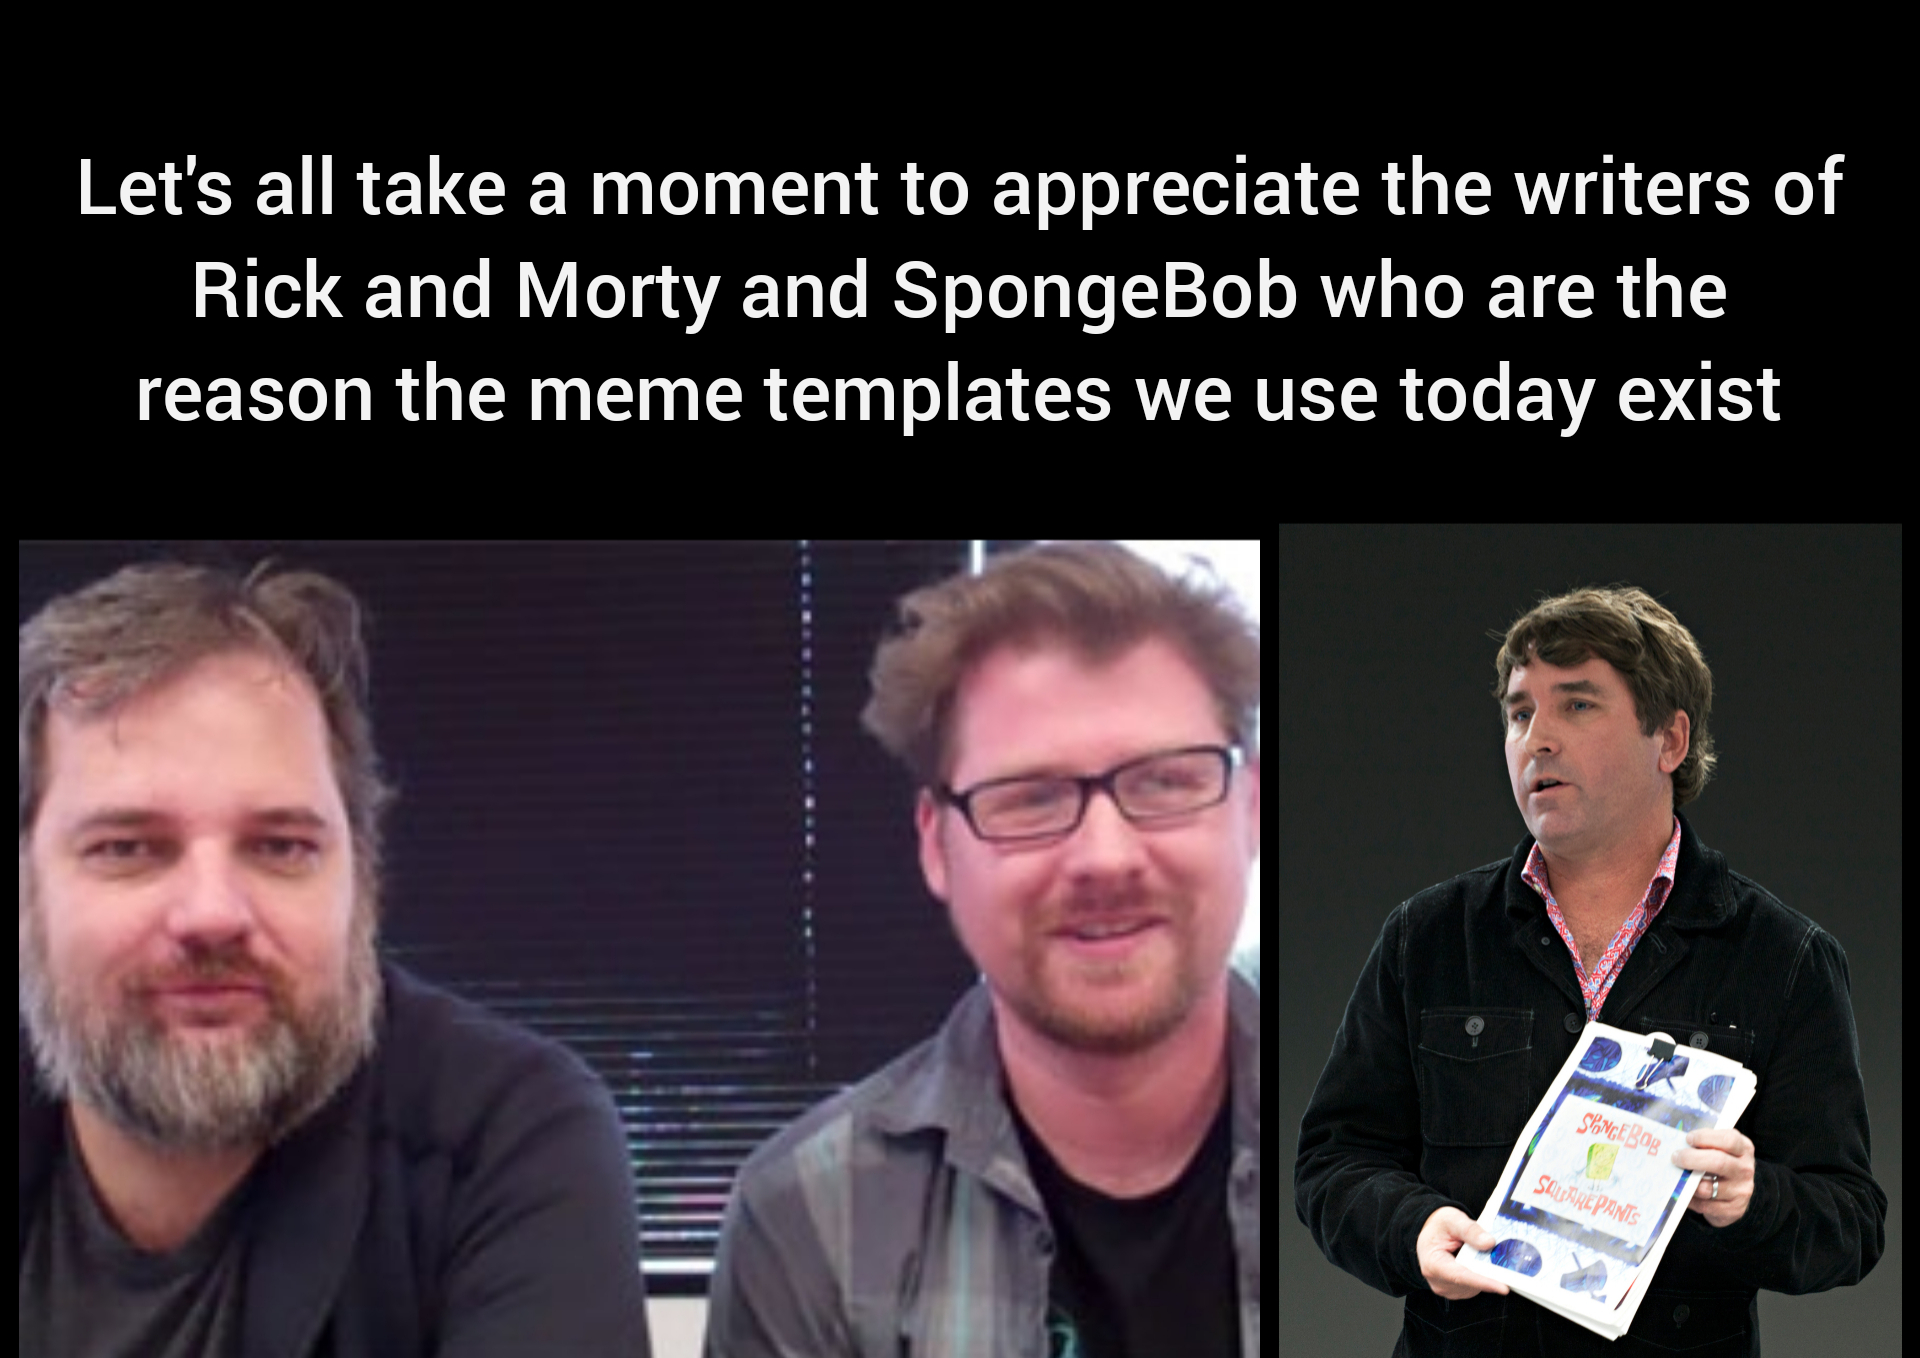 reddit dank memes 2020 - wish app - Let's all take a moment to appreciate the writers of Rick and Morty and SpongeBob who are the reason the meme templates we use today exist